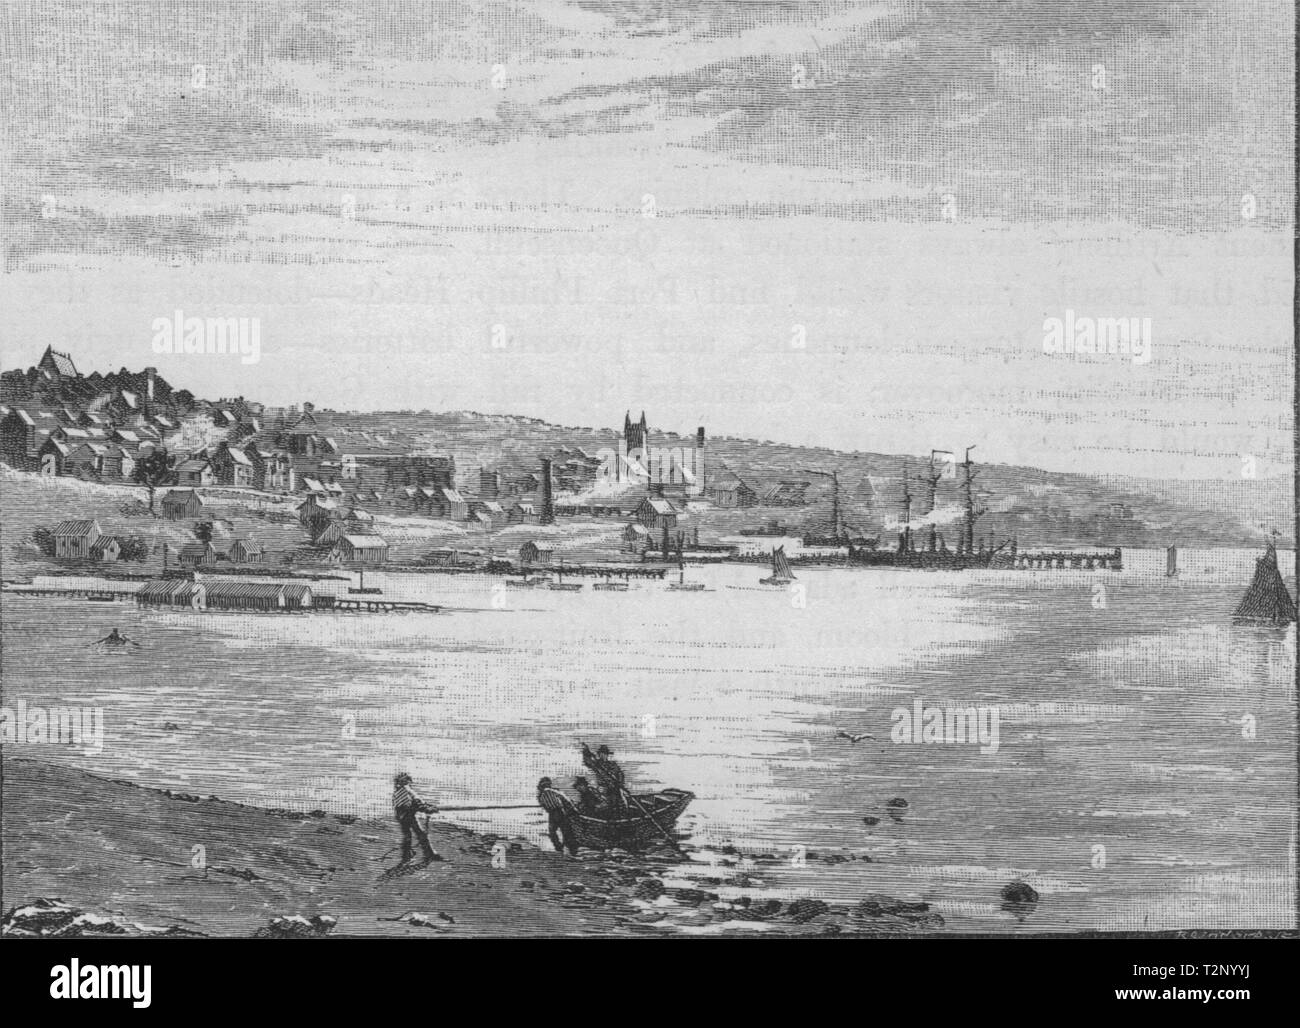 Geelong, from the Botanical Gardens. Geelong. Australia 1890 old antique print Stock Photo